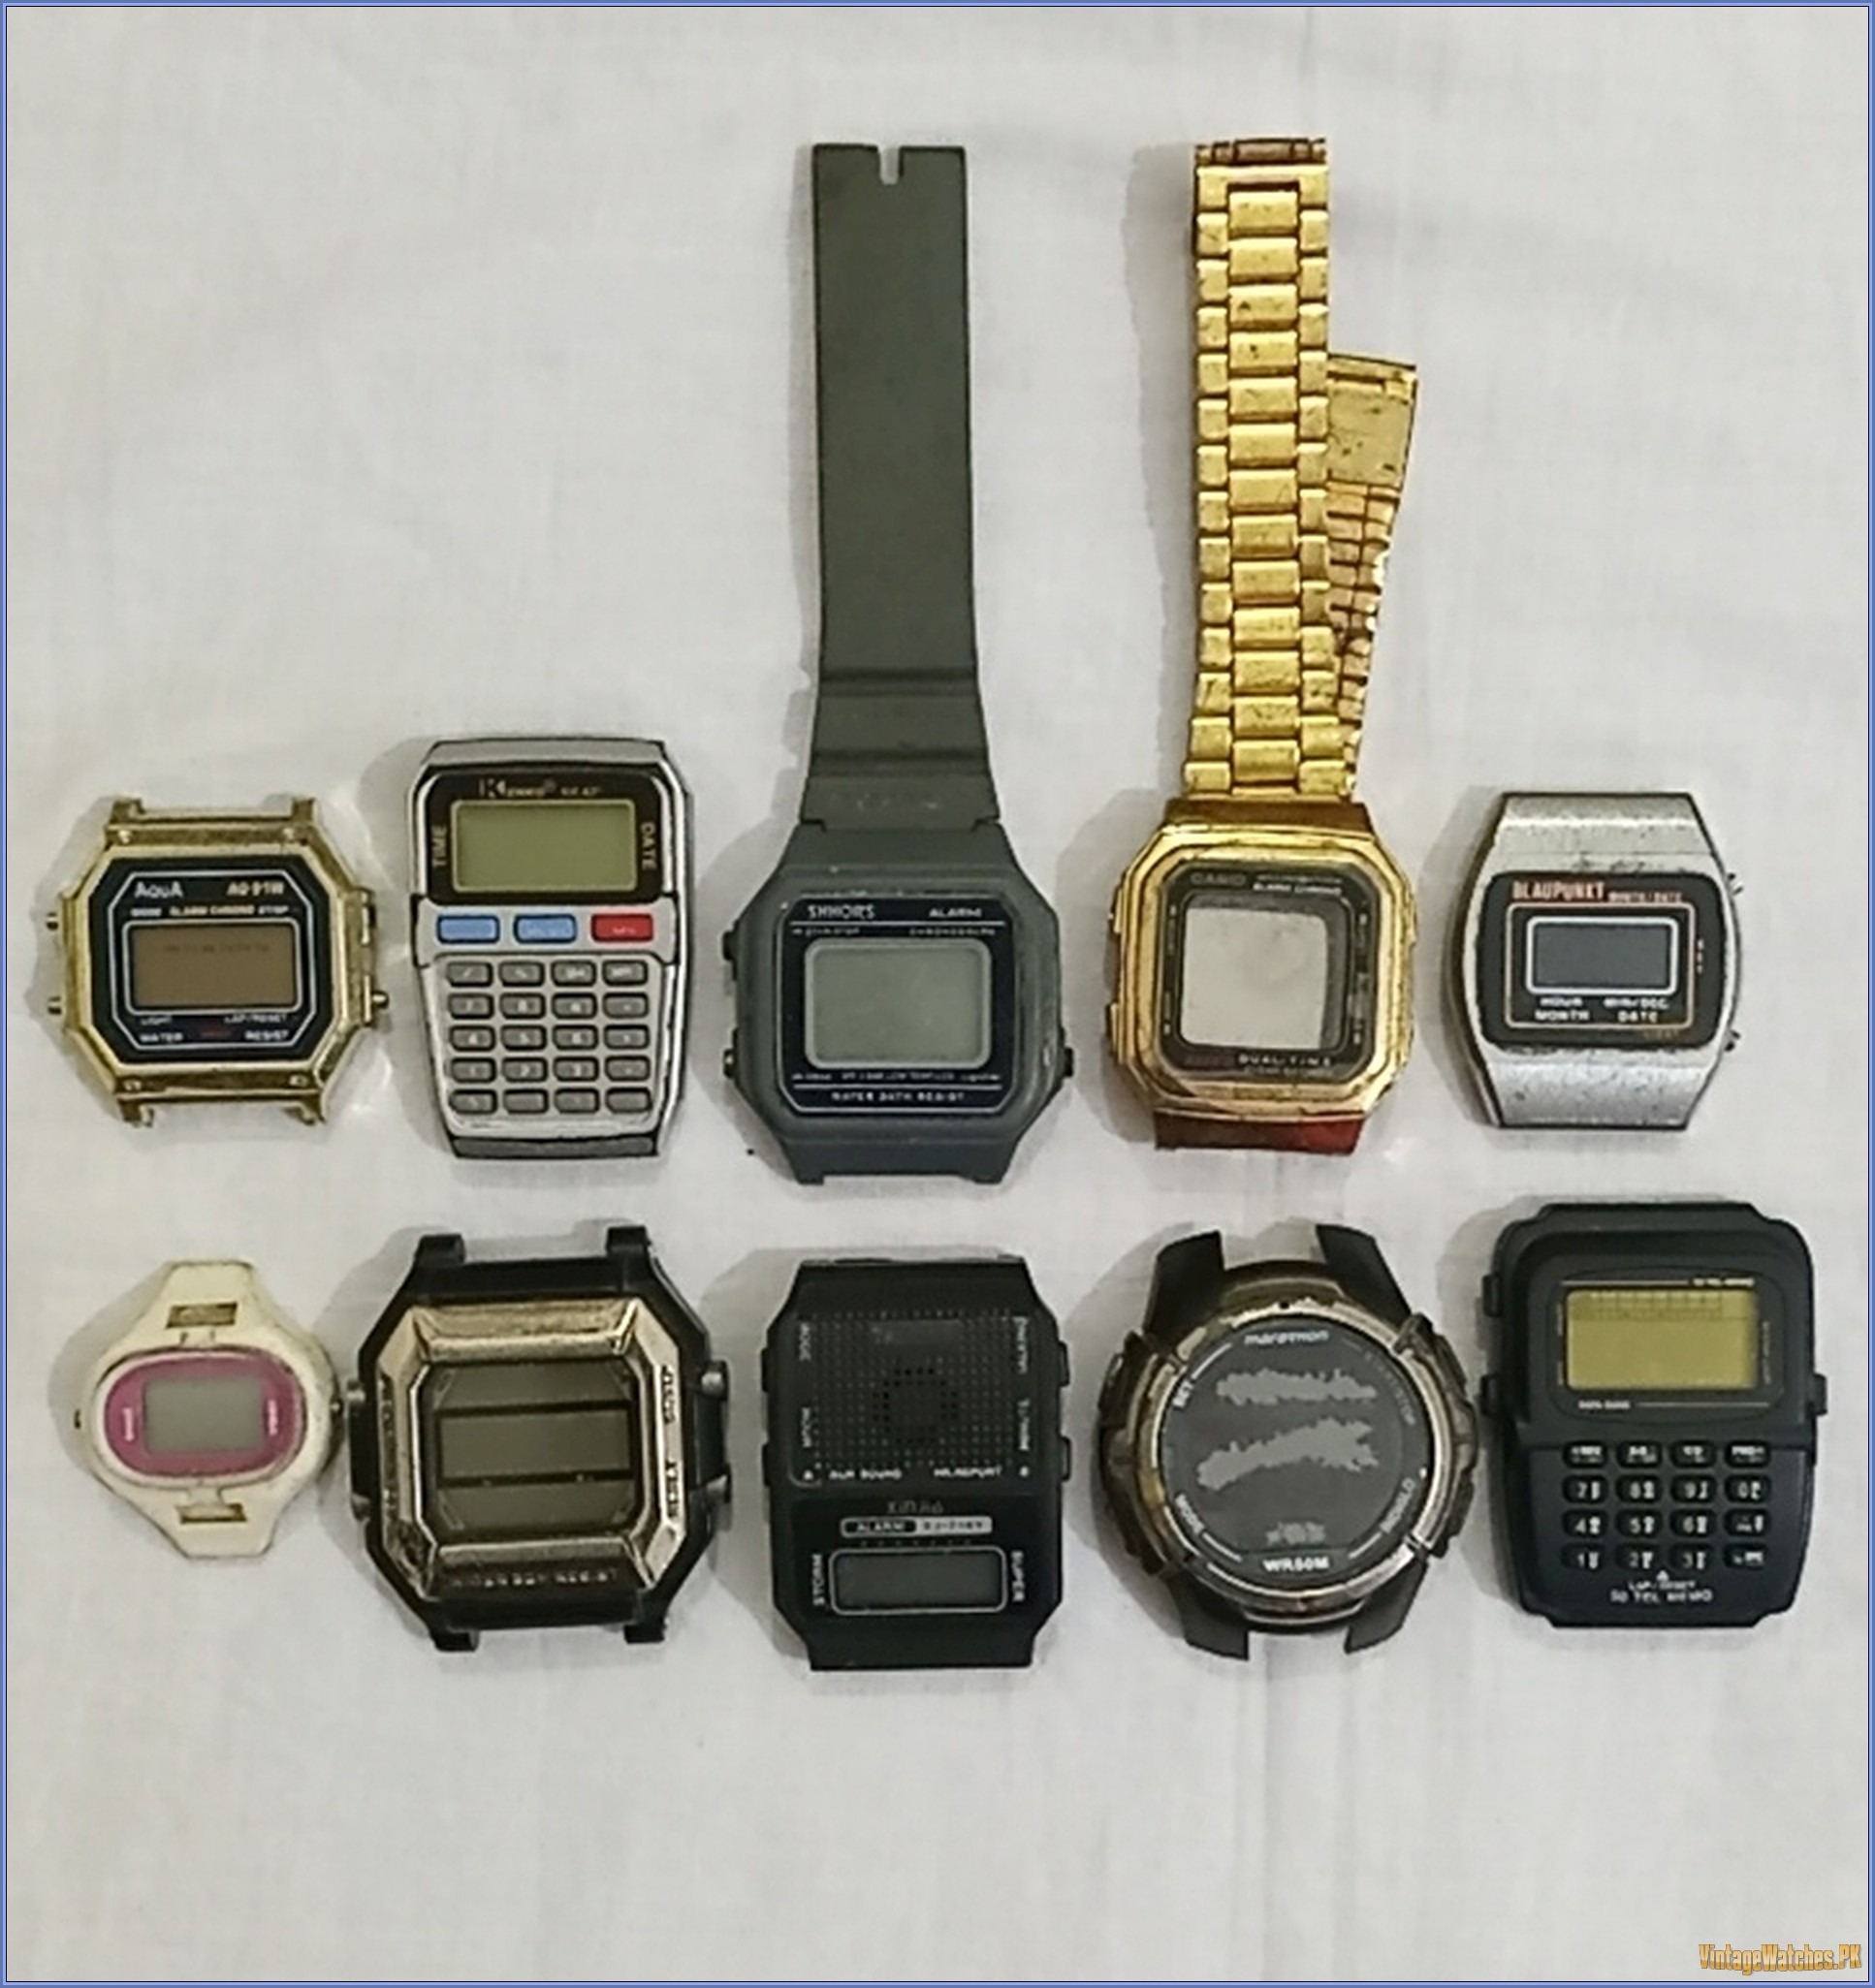 Lot of 10 Vintage Antique Digital LCD Calculator Watches Clocks China - PK00013 - vintagewatches.pk